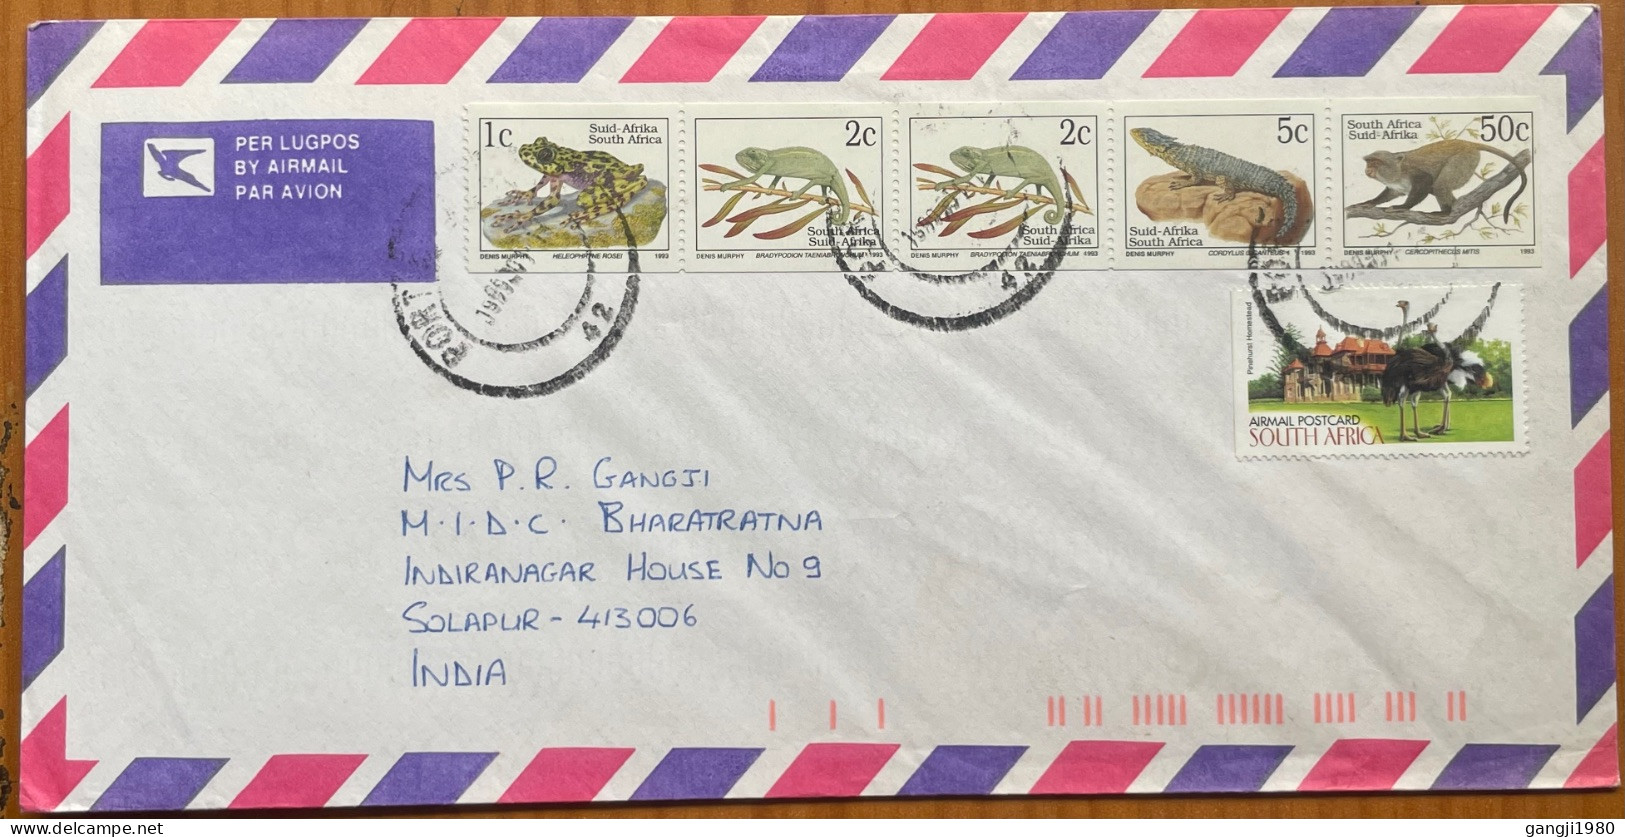 SOUTH AFRICA 1993, COVER USED TO INDIA, BOOKLET PANE, REPTILE, MONKEY, ANIMAL, BIRD, BUILDING, 6 STAMP, PORT ELIZABETH - Lettres & Documents